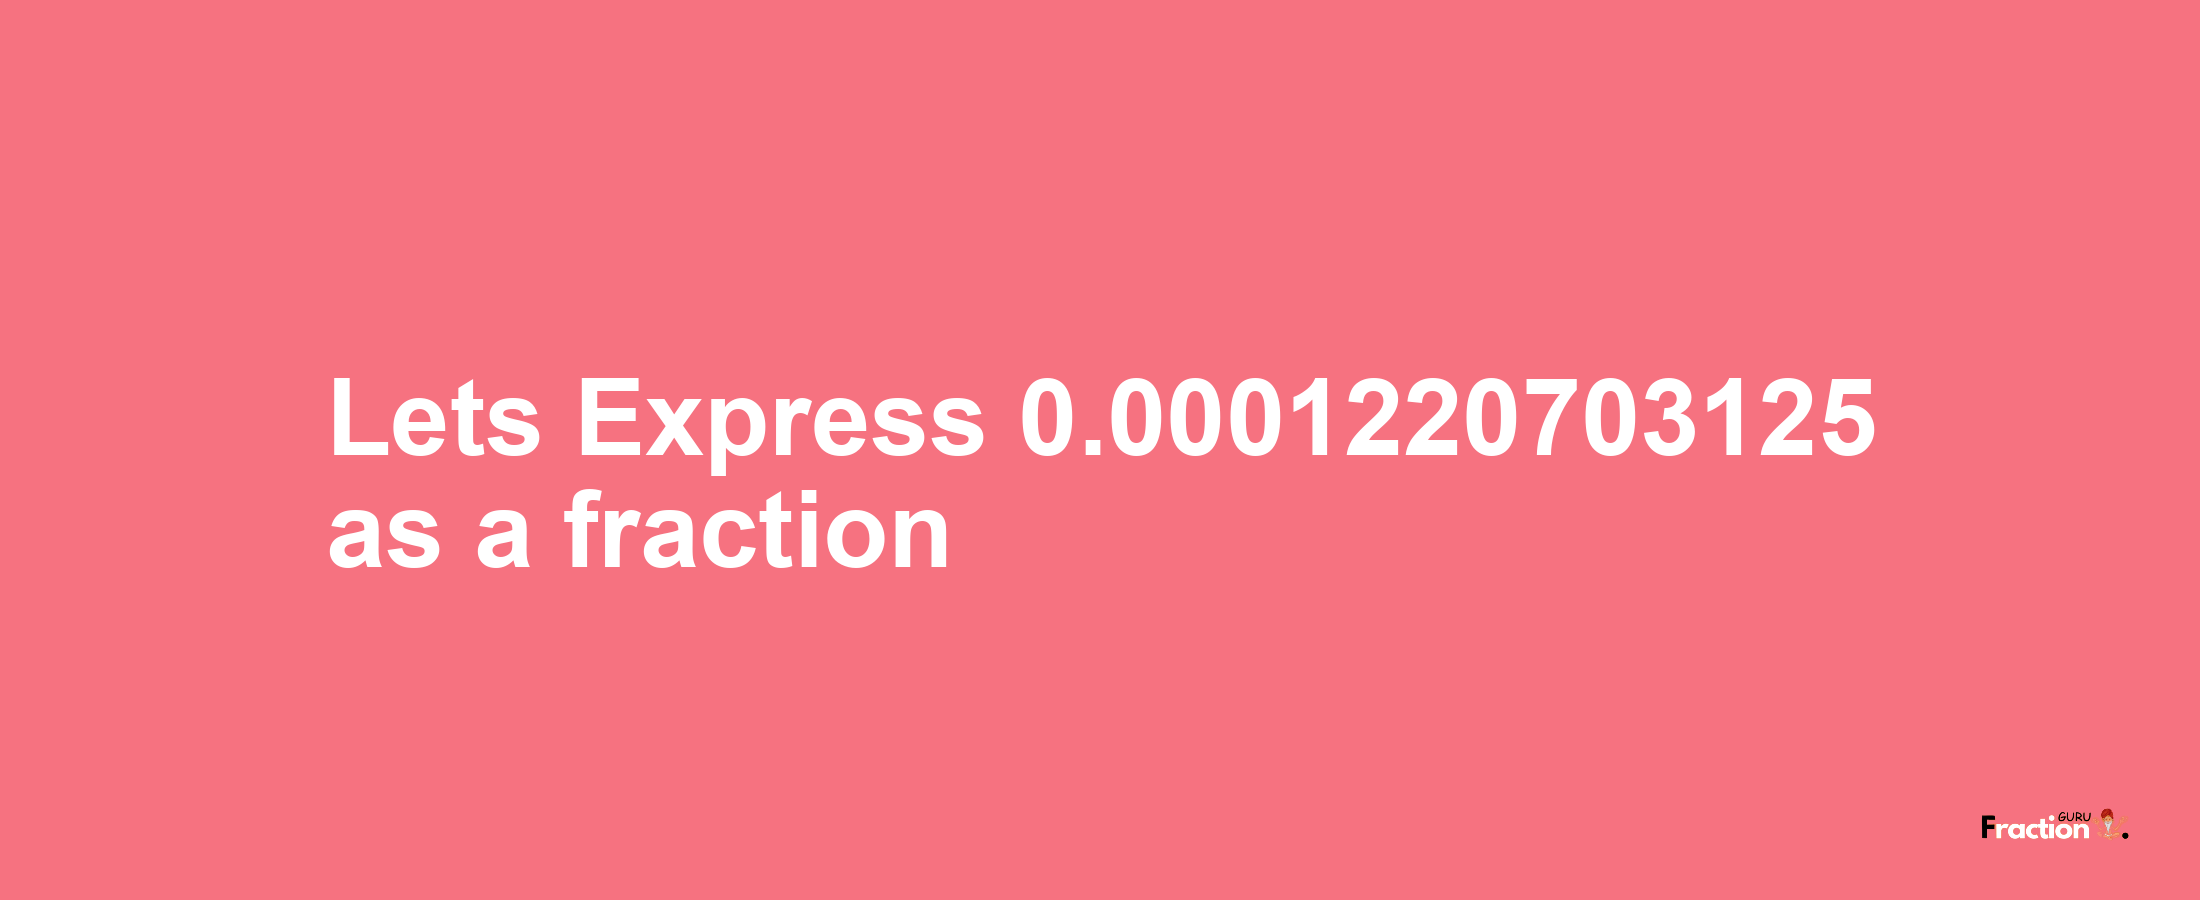 Lets Express 0.0001220703125 as afraction